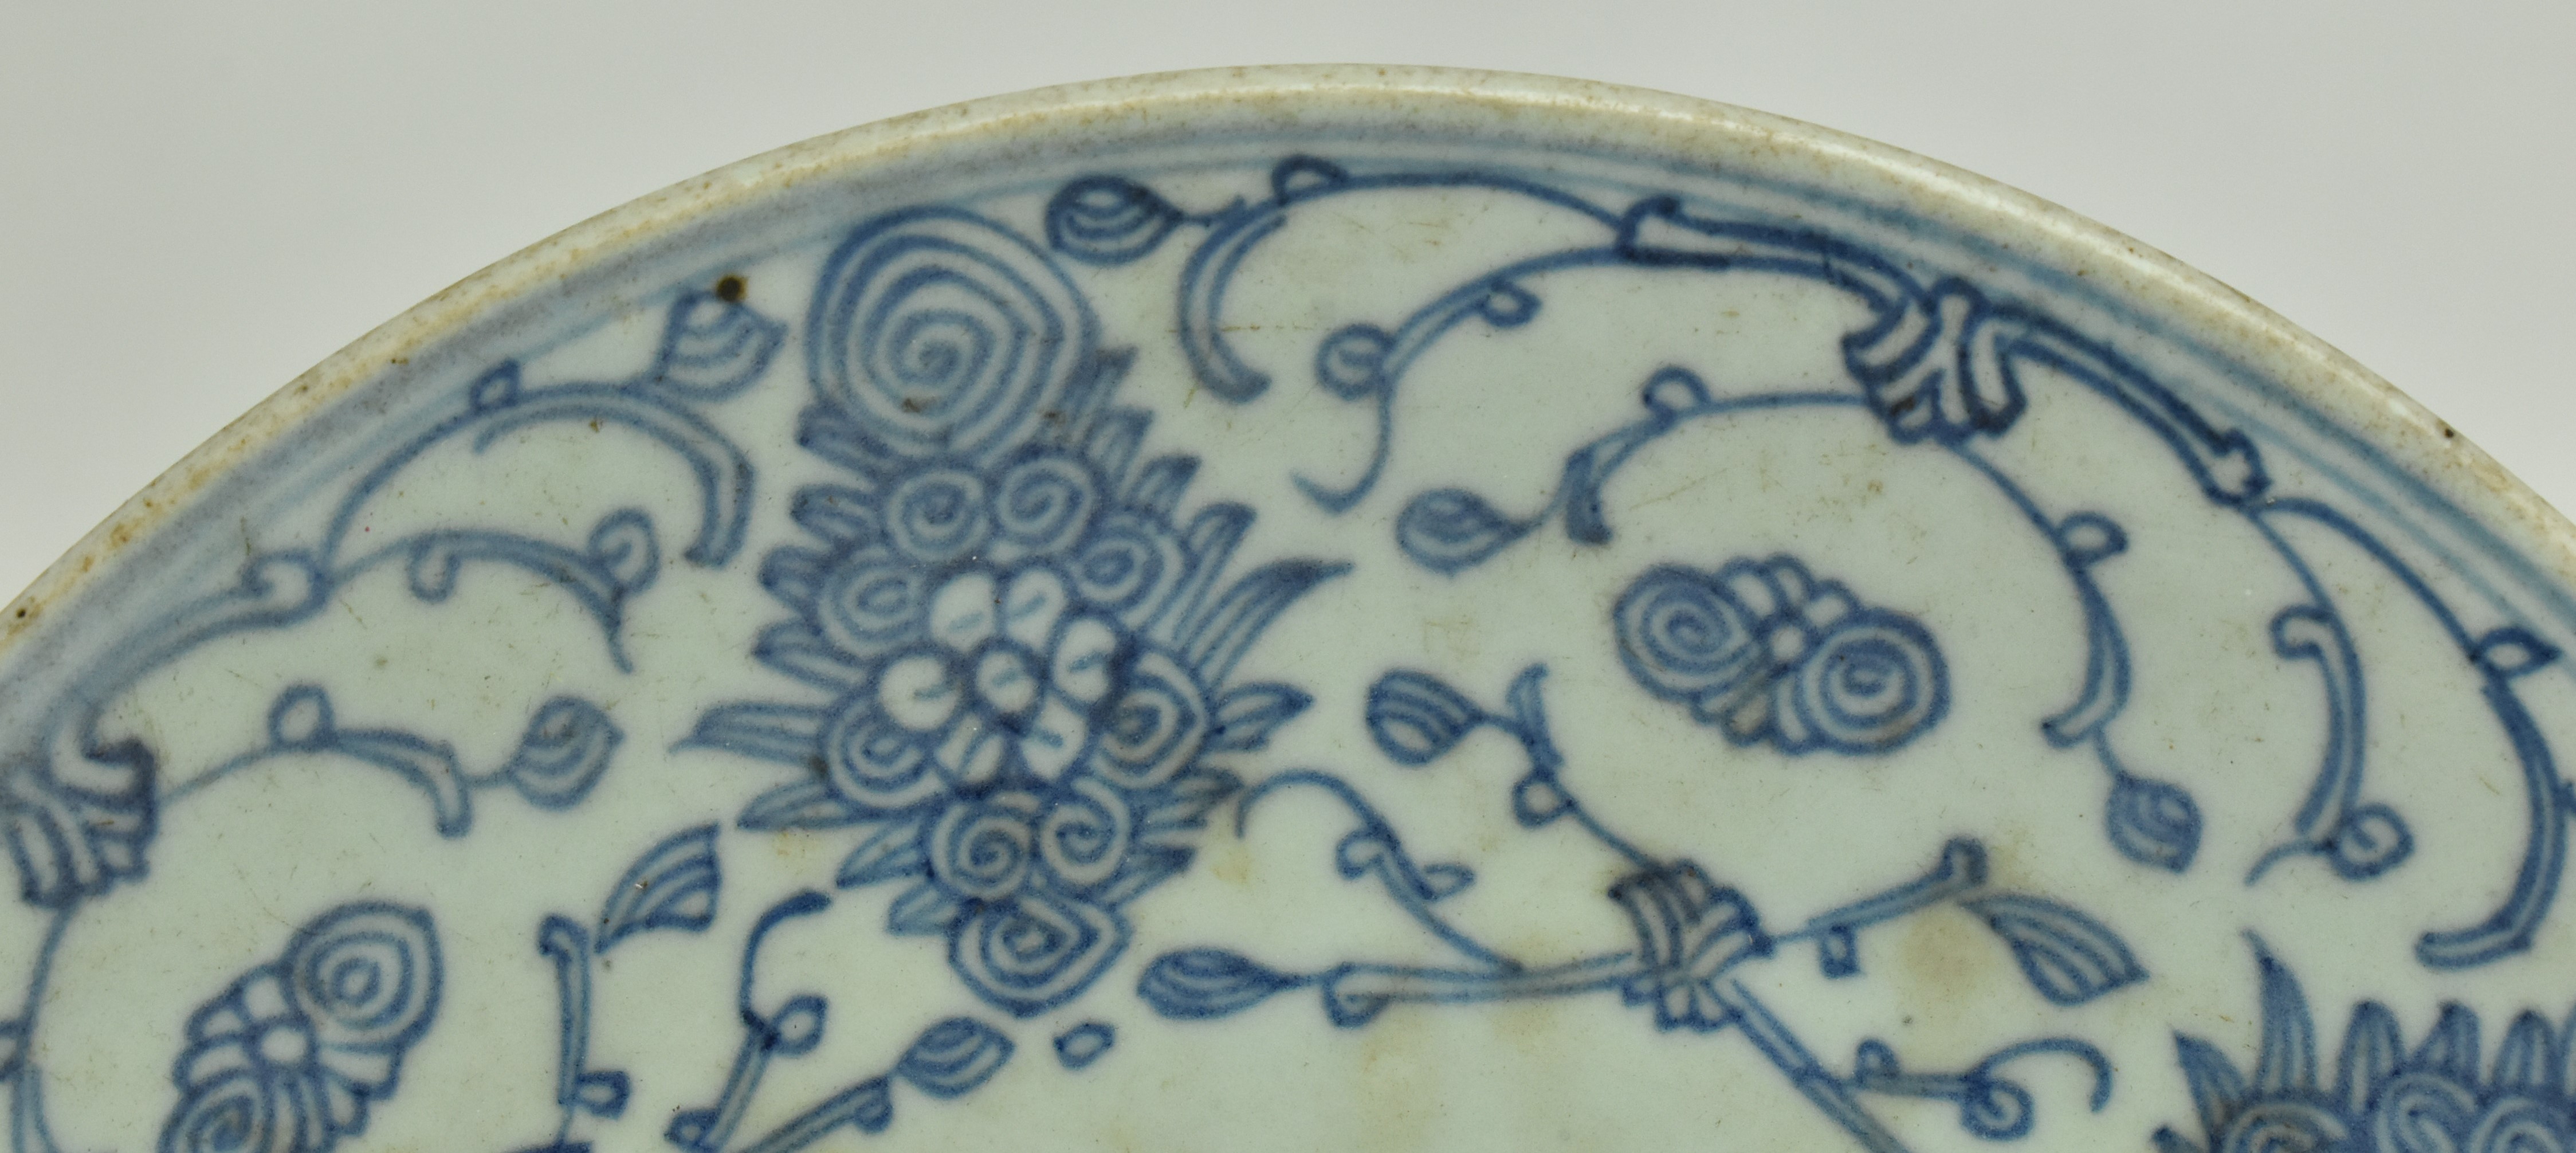 QING DAOGUANG PERIOD BLUE AND WHITE PLATE 清 道光青花盘 - Image 4 of 7